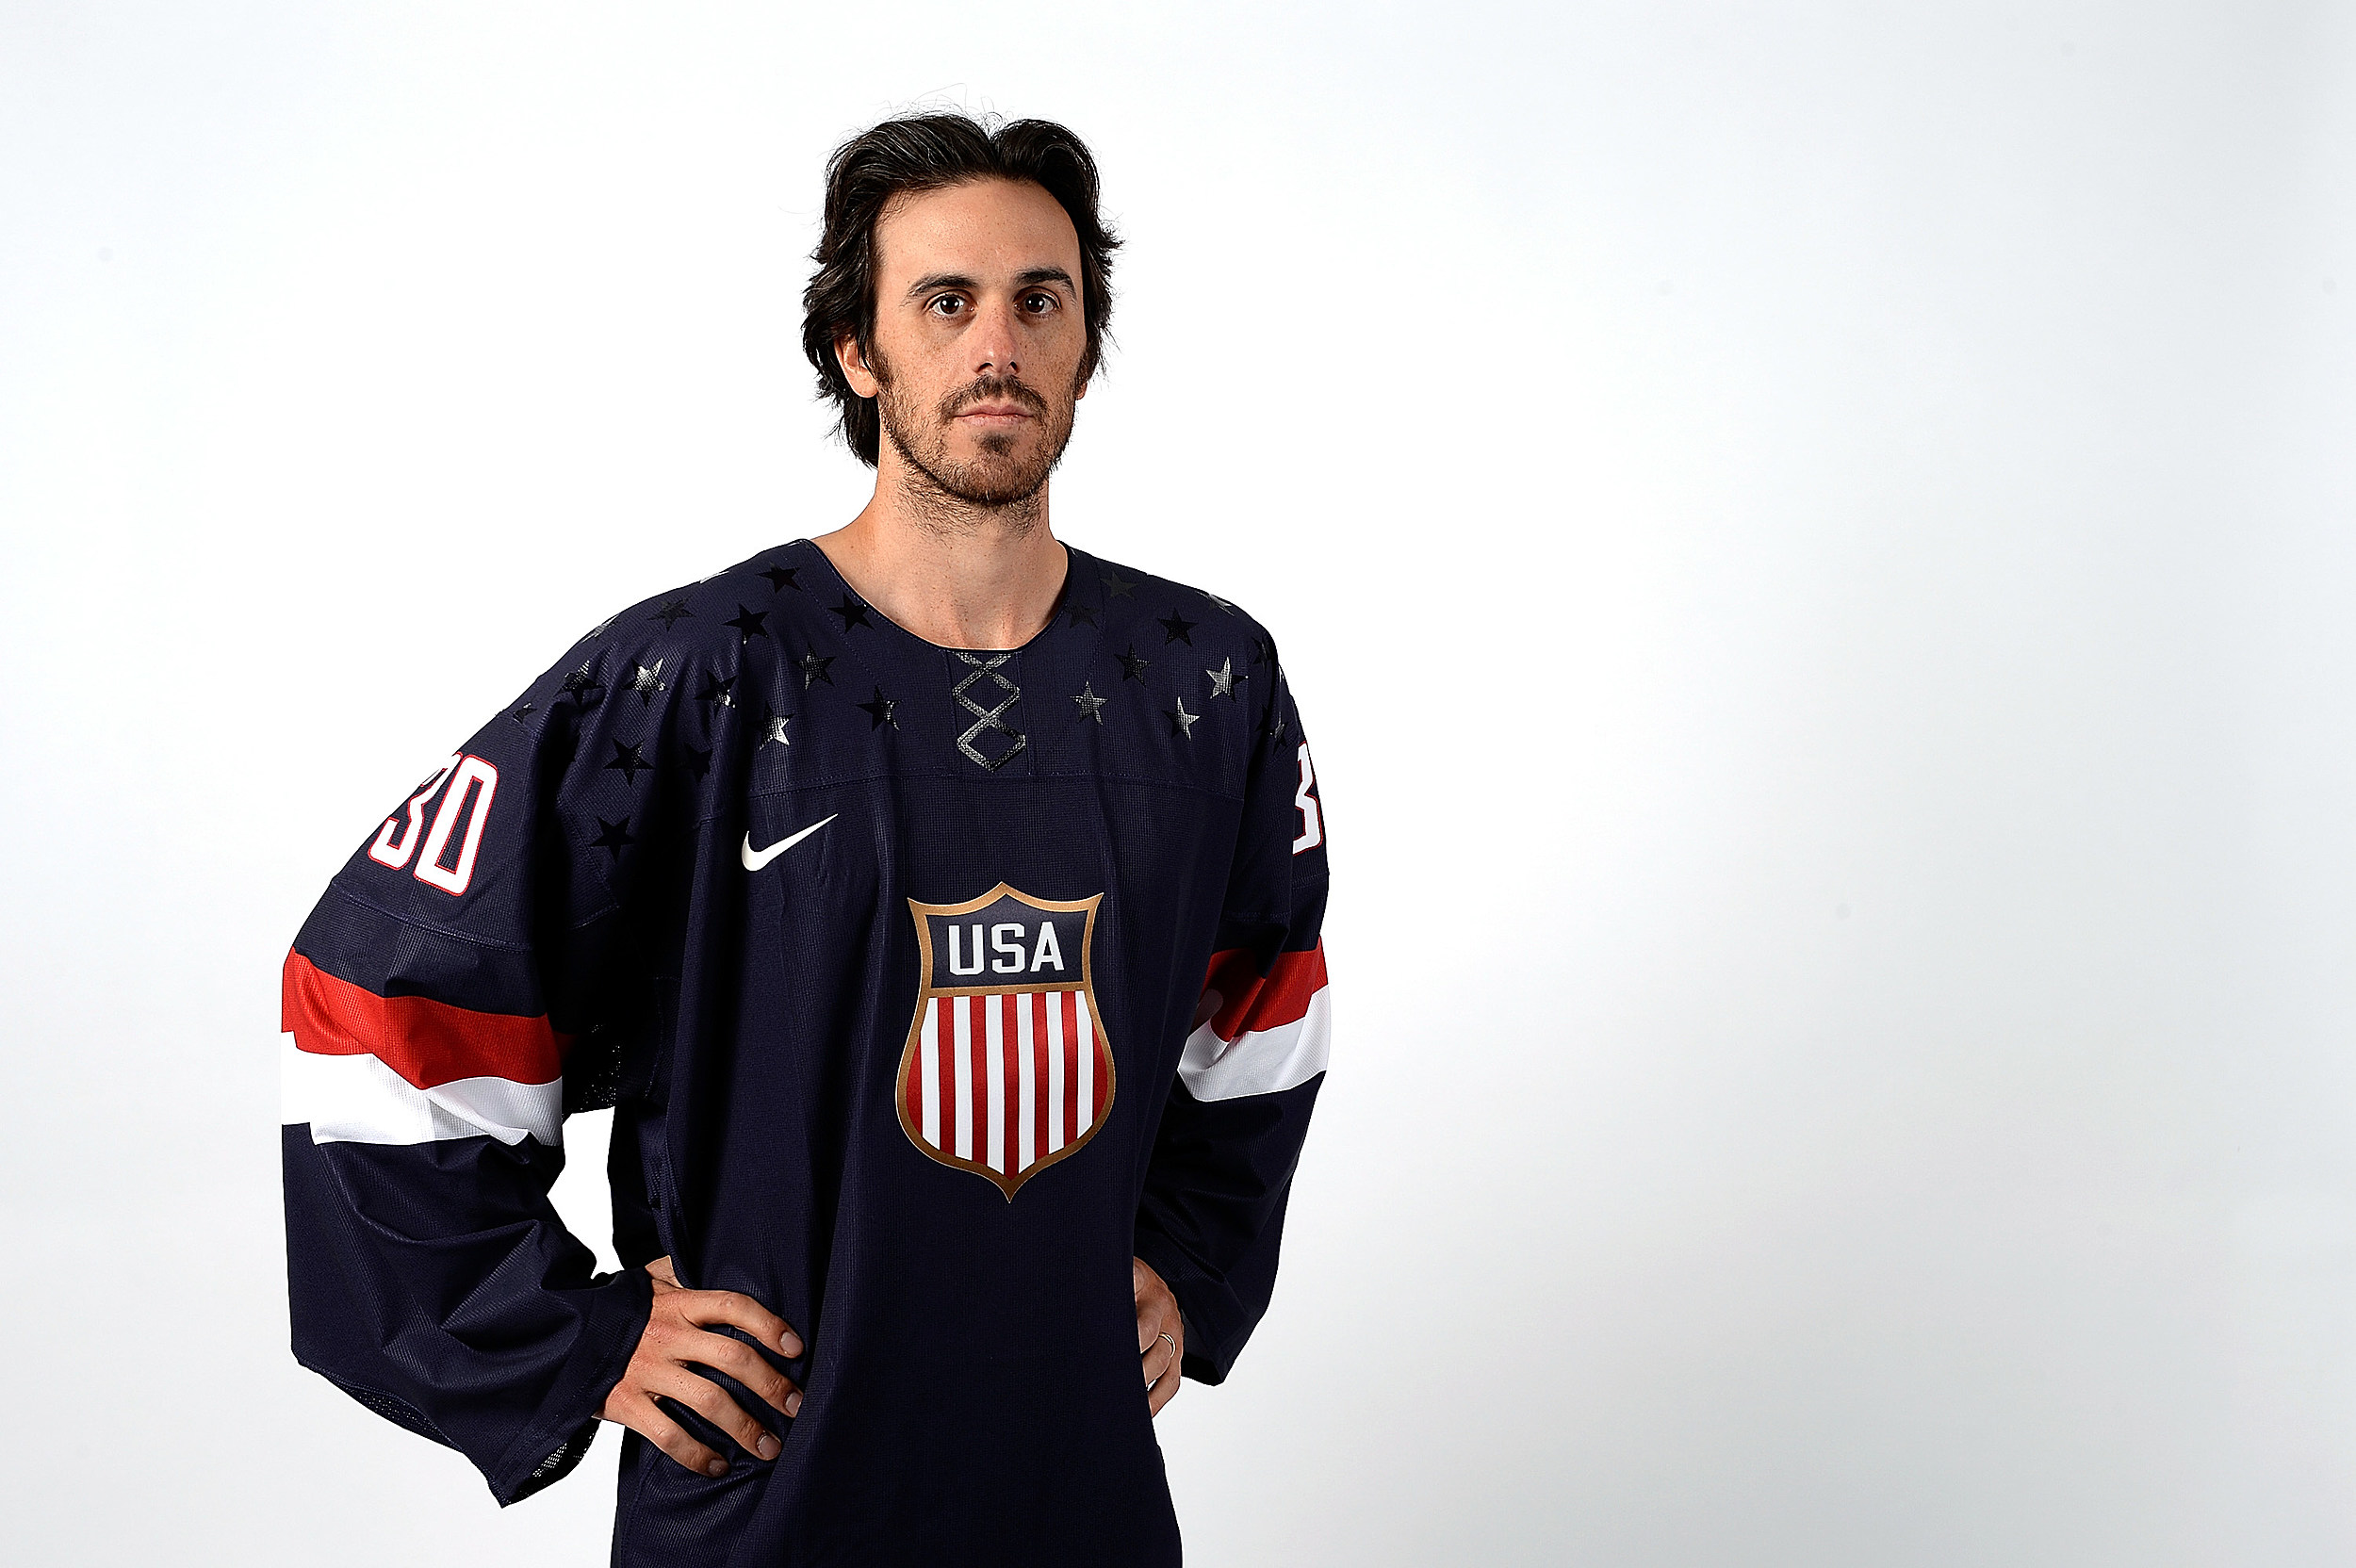 Michigan State, US Olympic goalie great Ryan Miller to retire from hockey